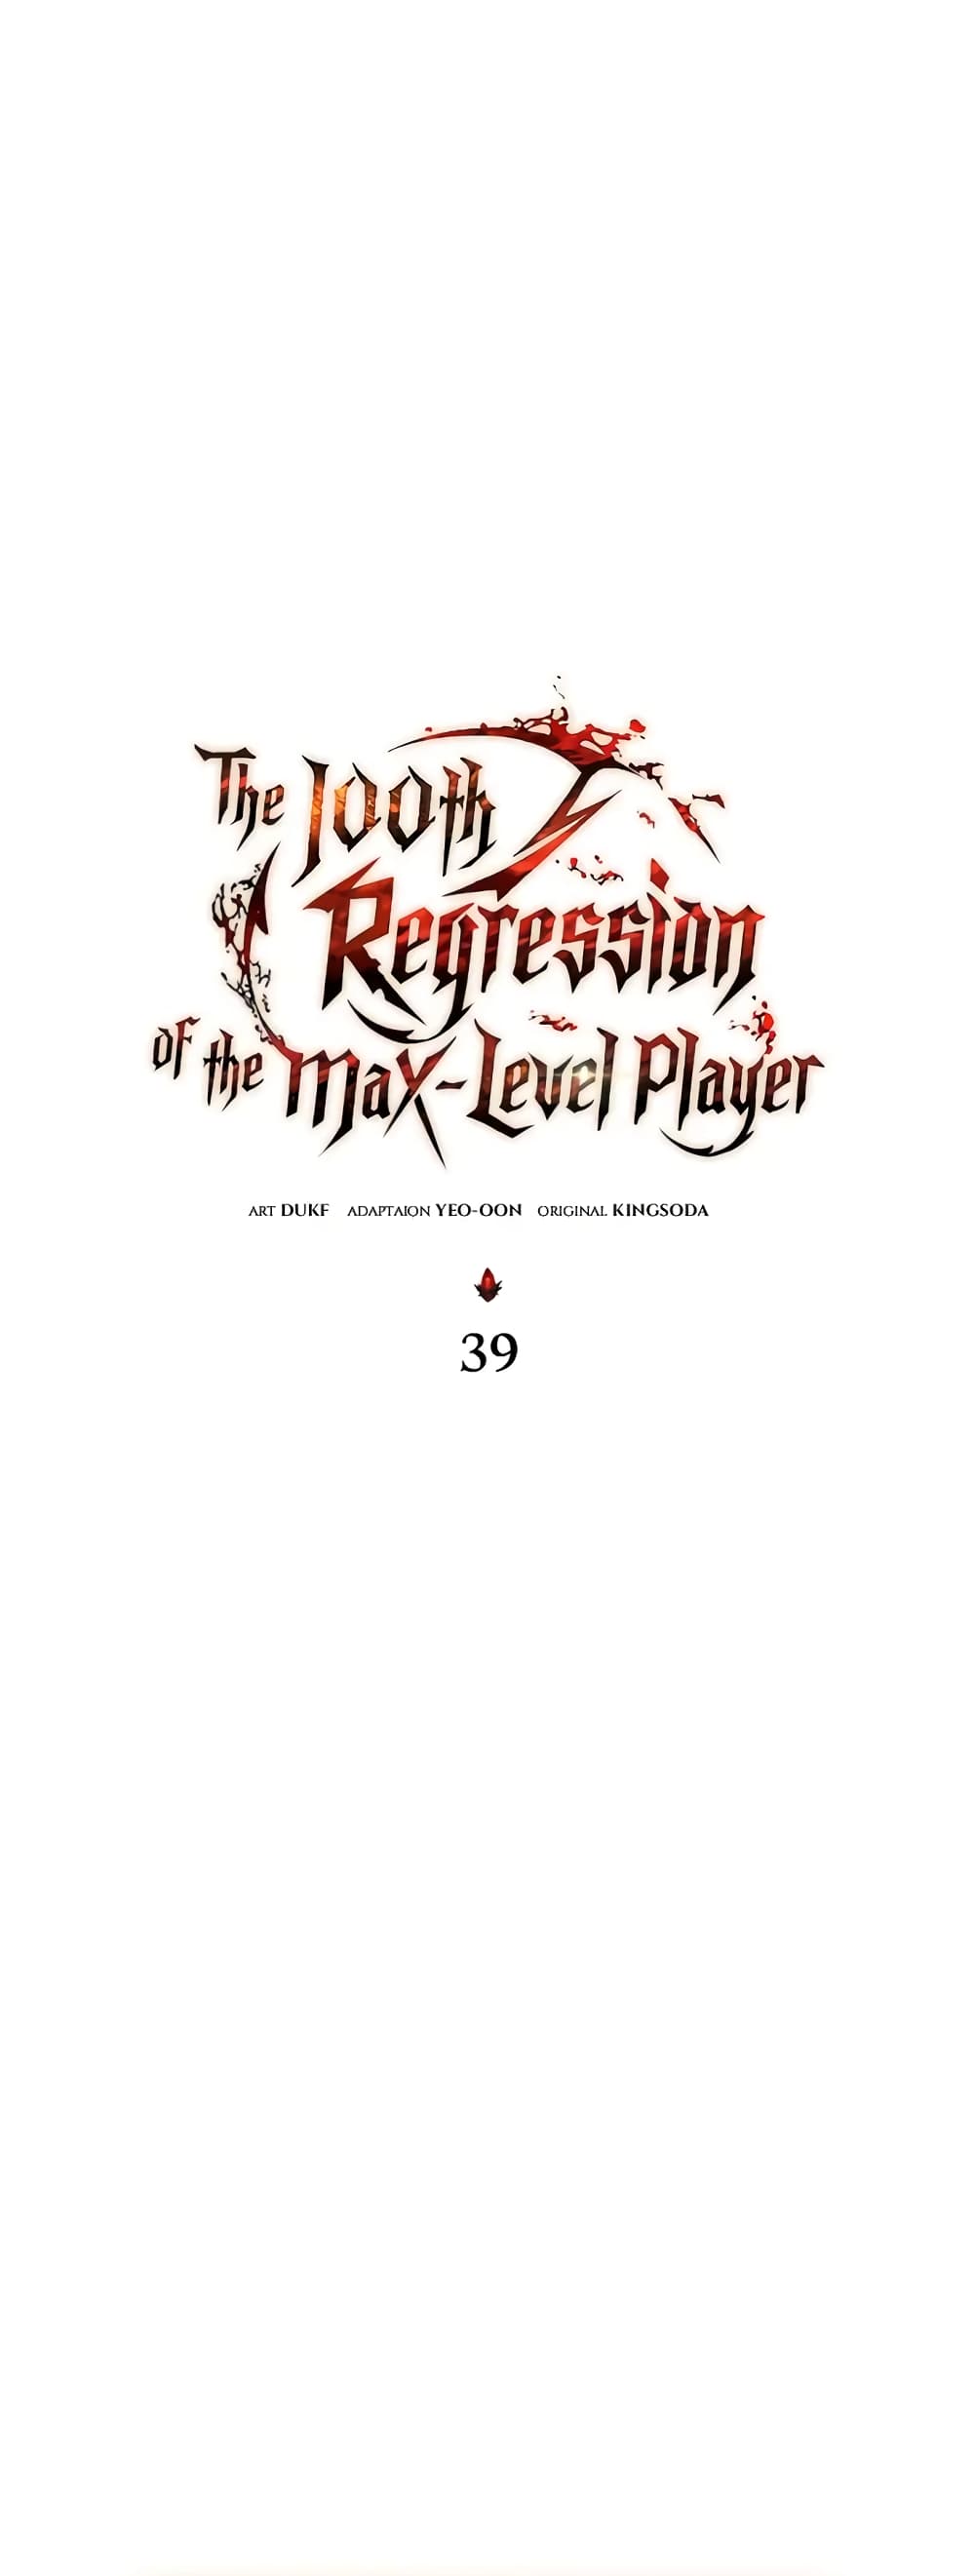 The 100th Regression of the Max-Level Player 39-39